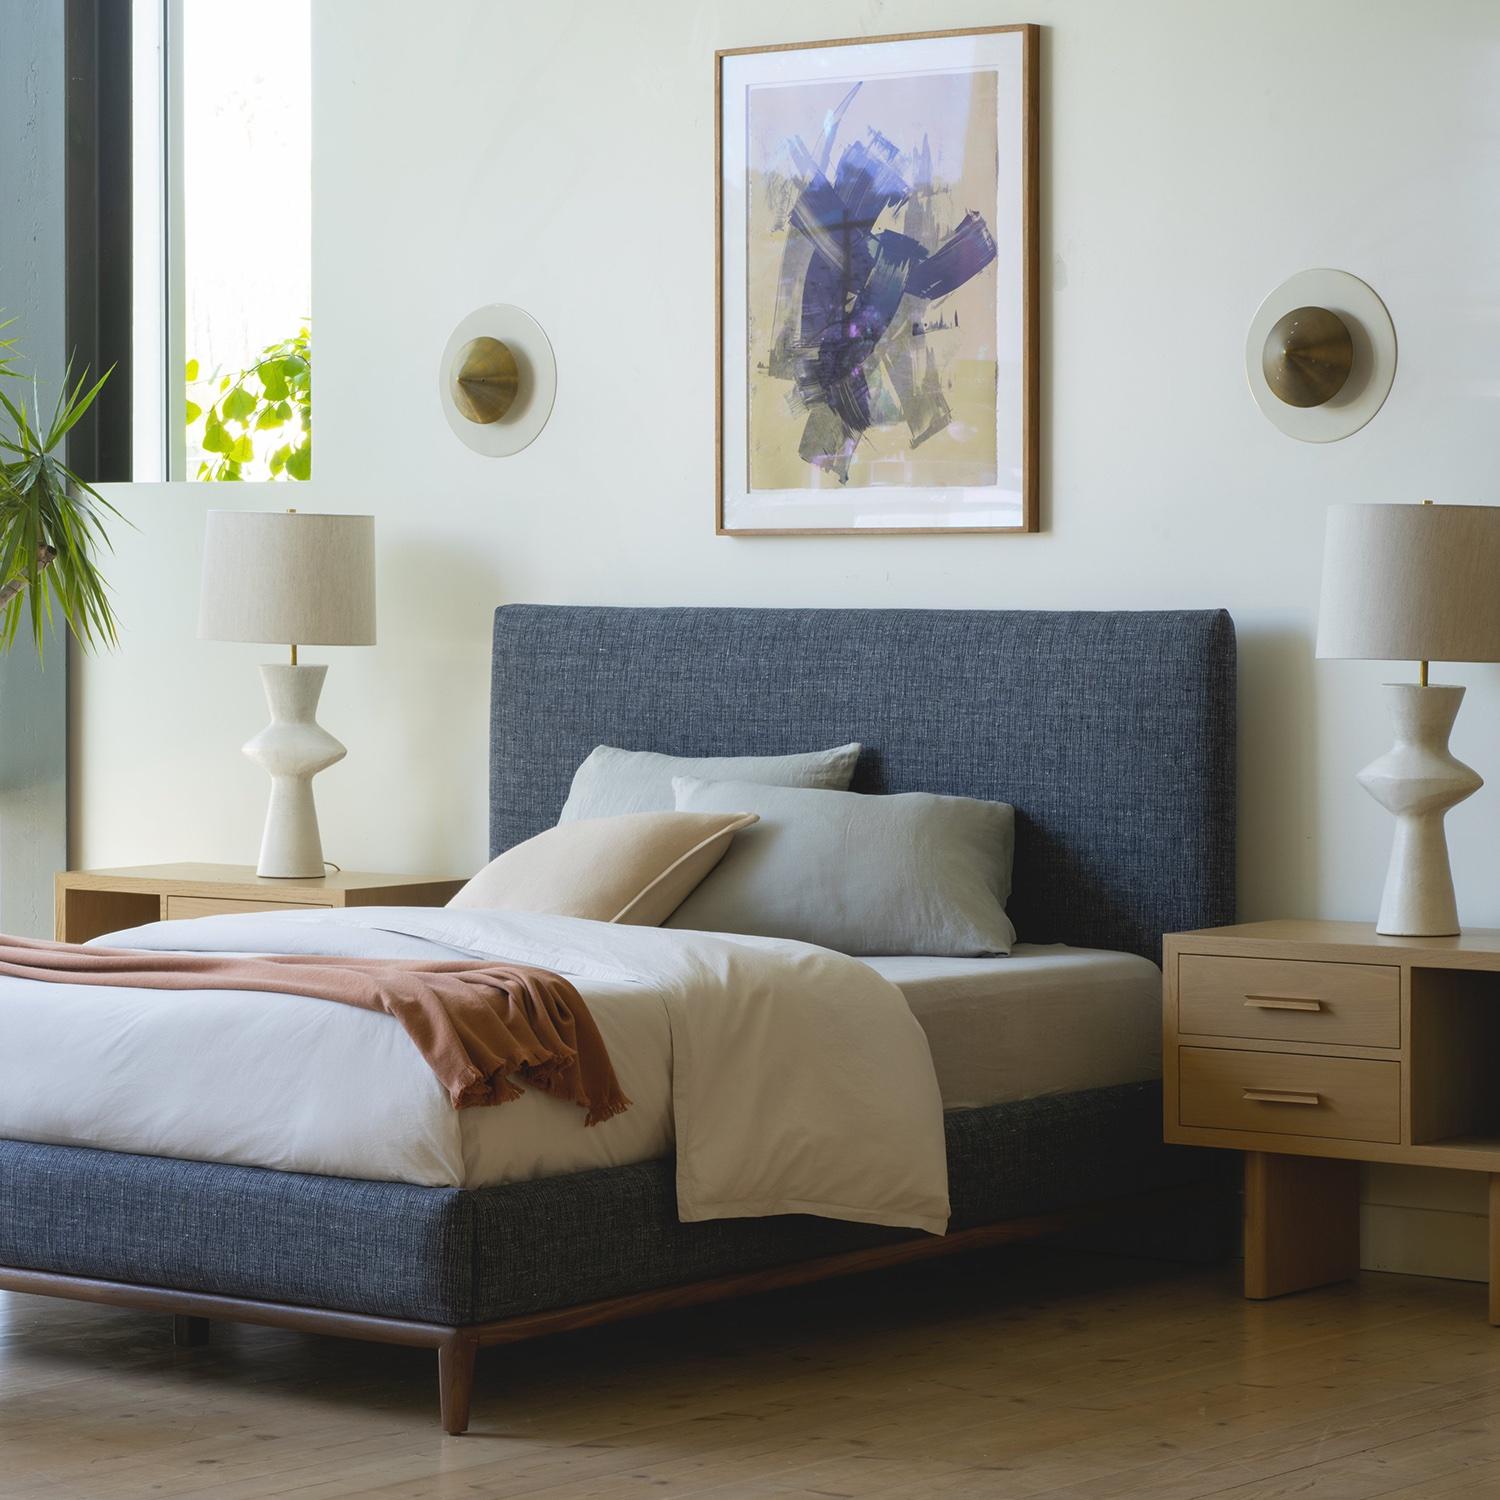 The Montebello bed is a clean and classic piece with an upholstered headboard and side rails. The base is made of turned solid American walnut or white oak. 

The Lawson-Fenning Collection is designed and handmade in Los Angeles, California. Reach